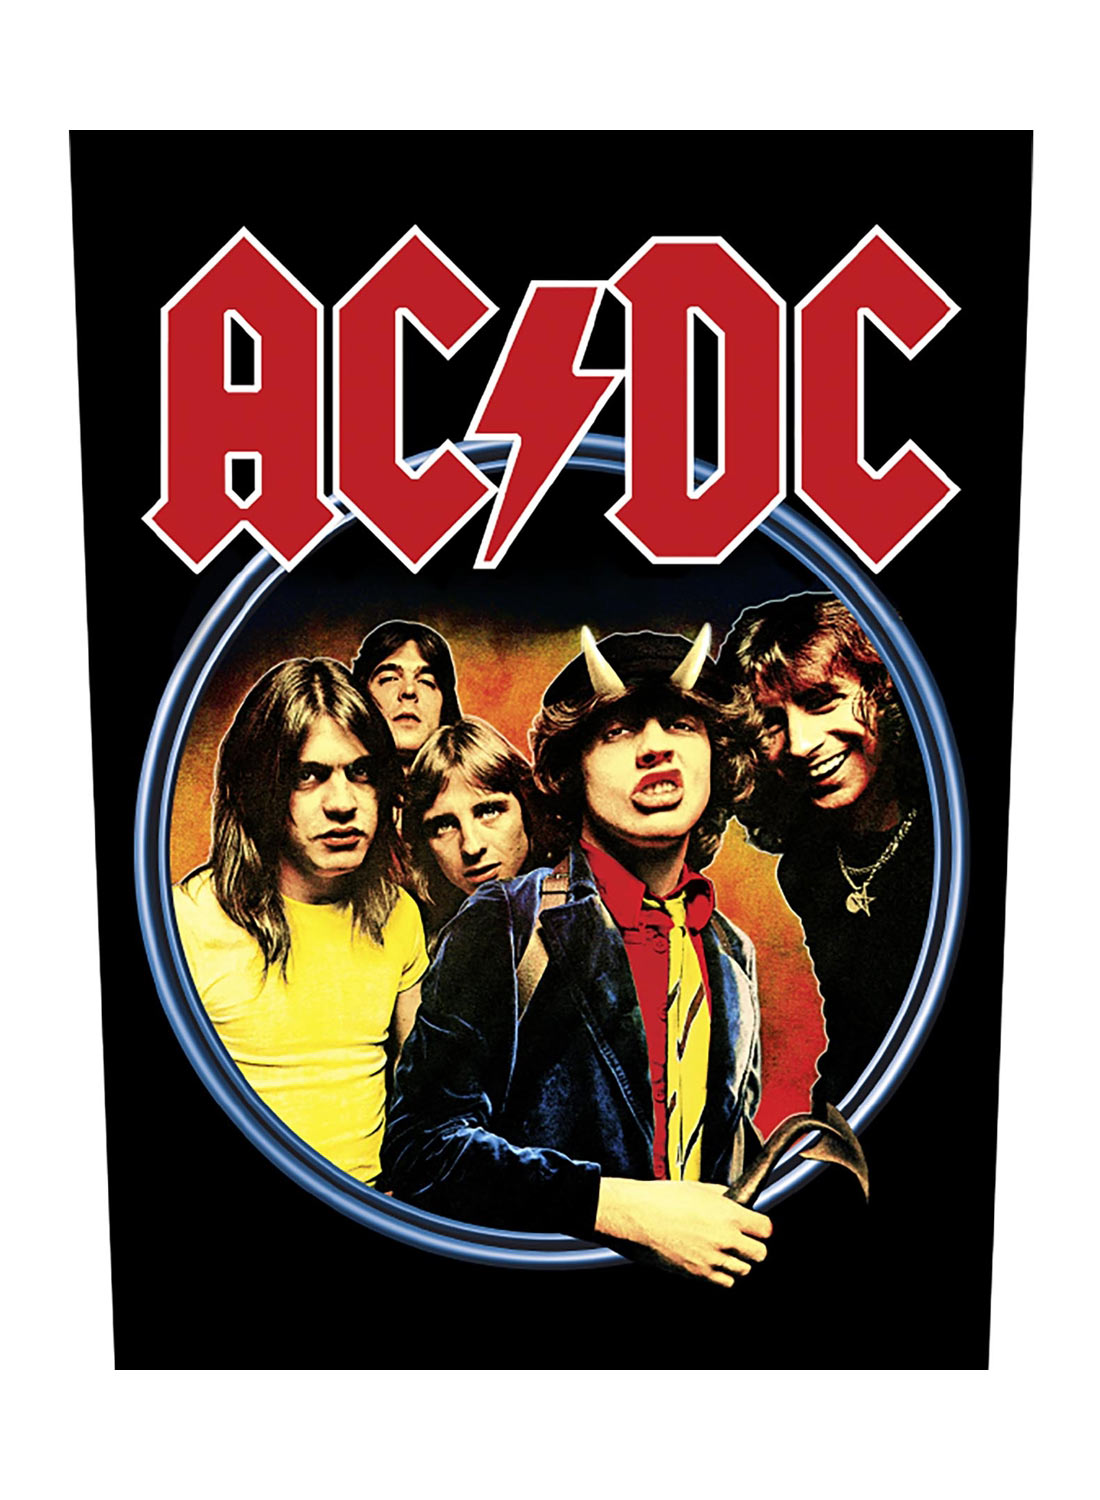 AC/DC Highway to Hell Back Patch